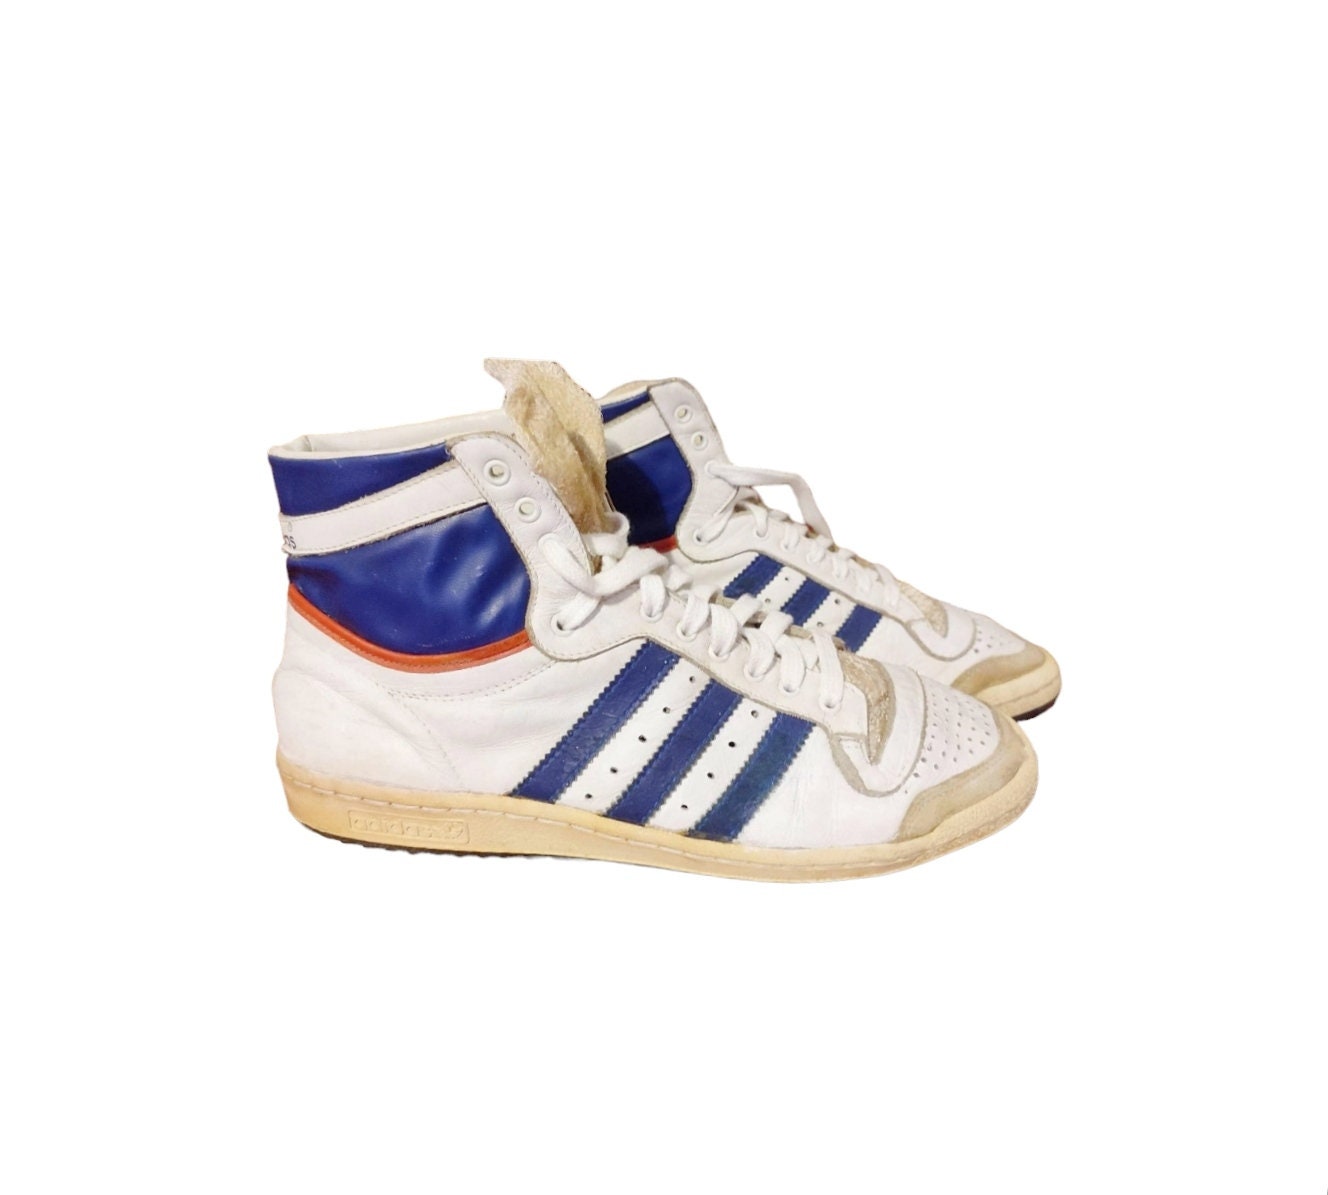 Vintage Adidas Decade Basketball Boots Sneakers Hi Top Leather Original  80's 423